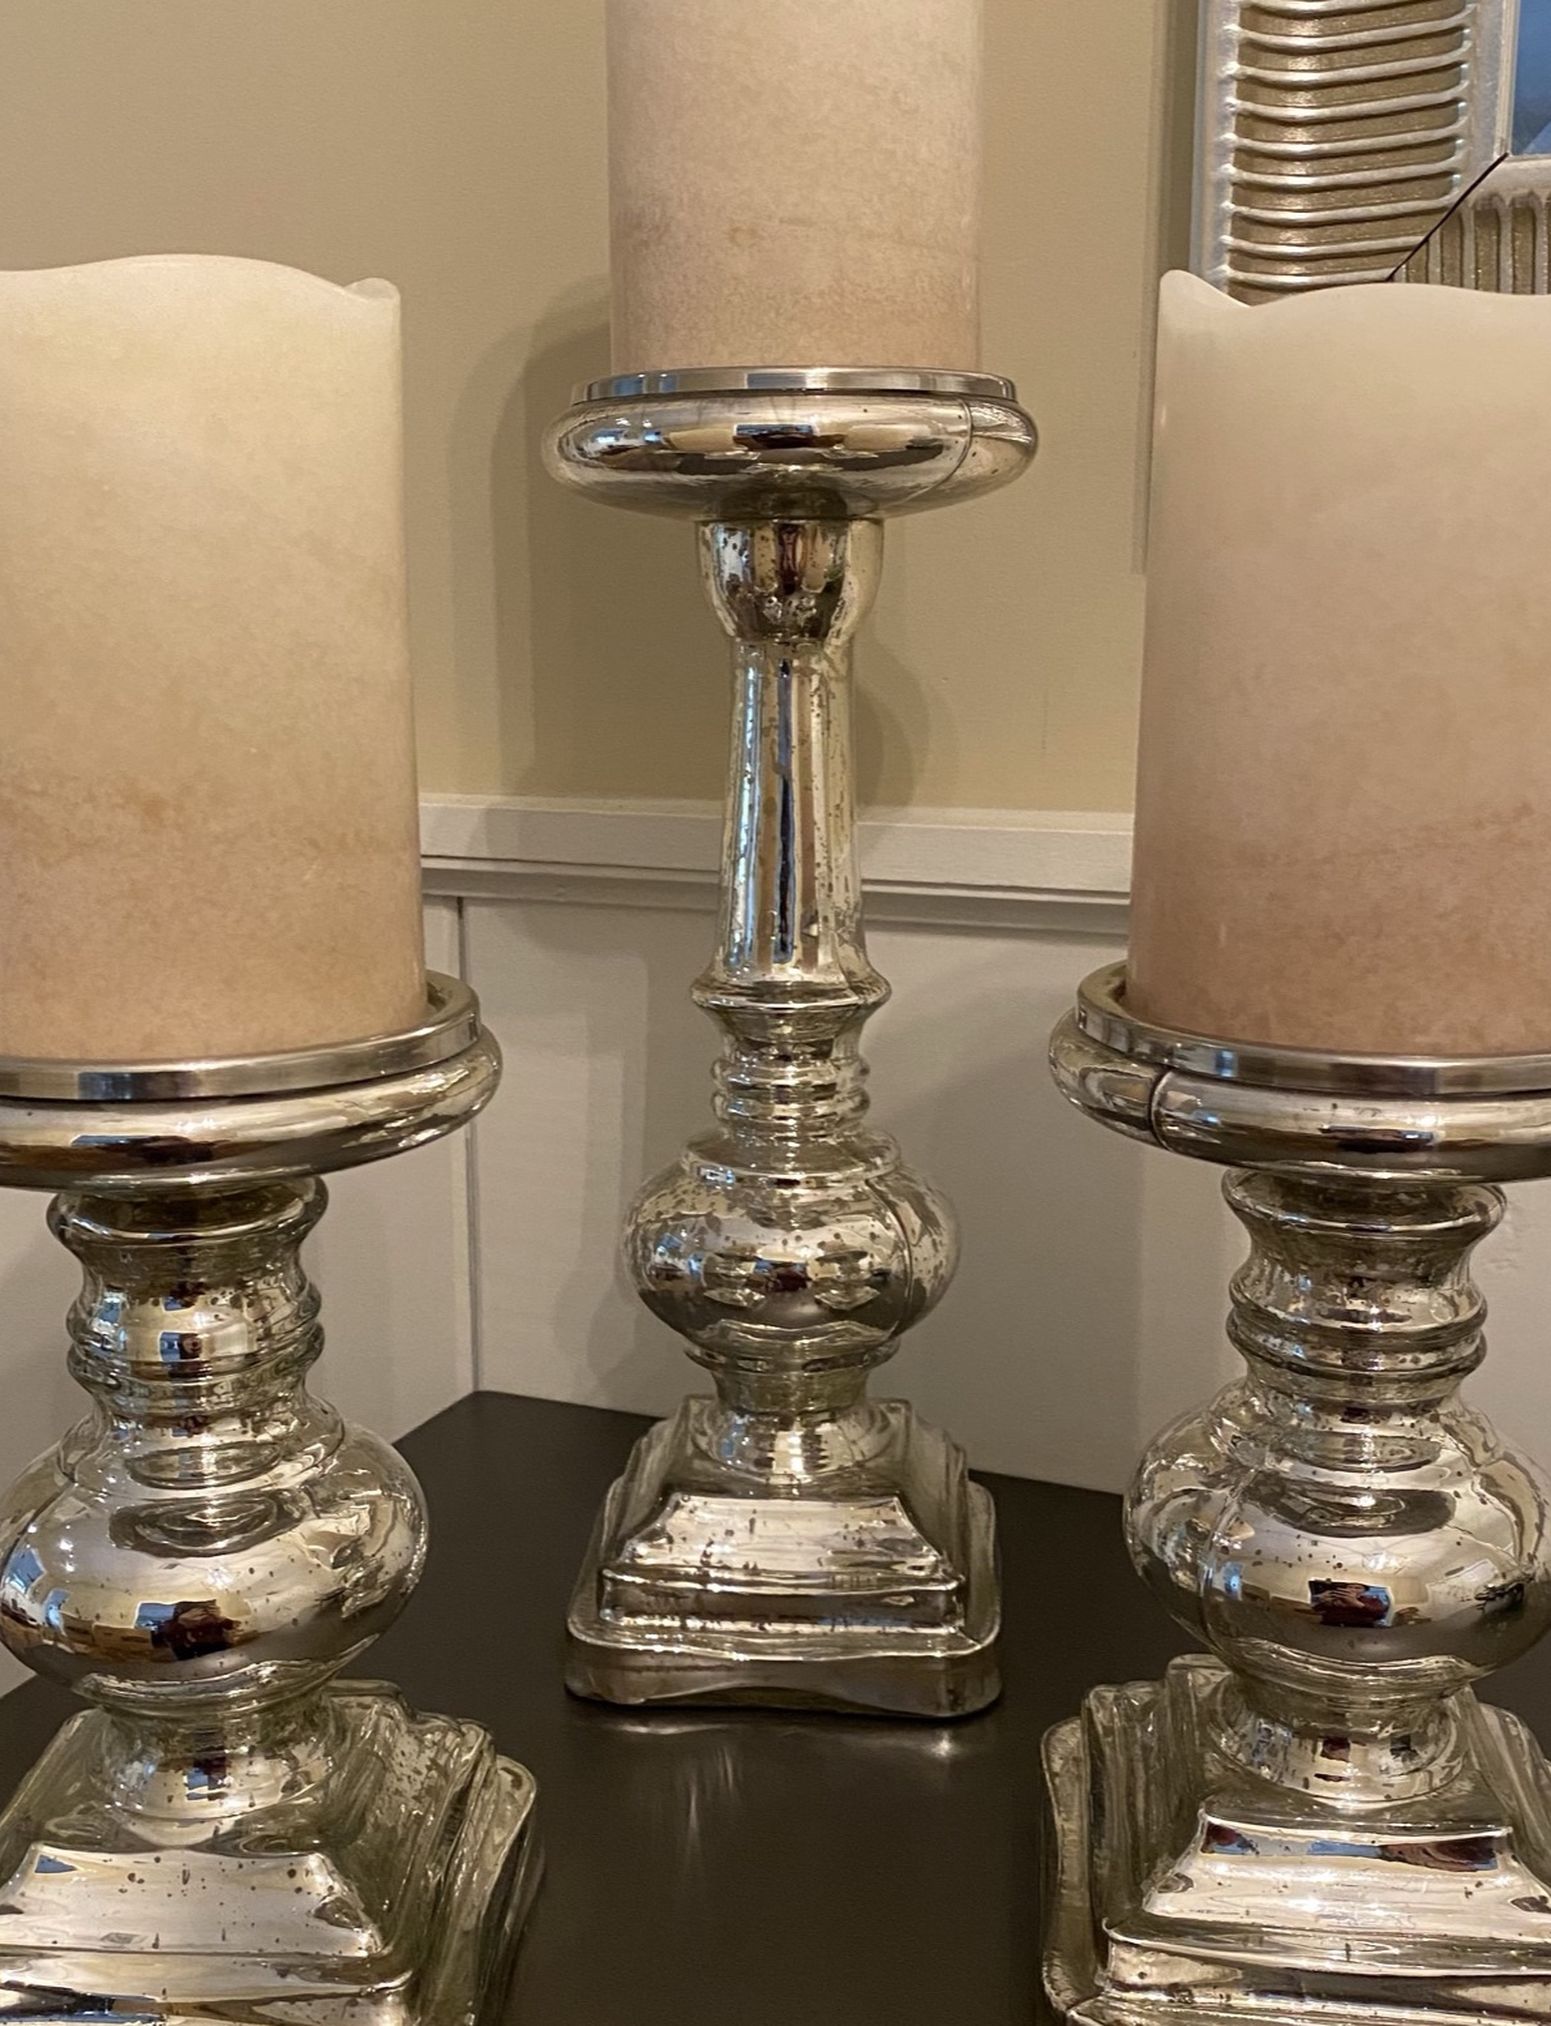 Glass Vintage Candle Holders And Shameless Candles from Pottery Barn.